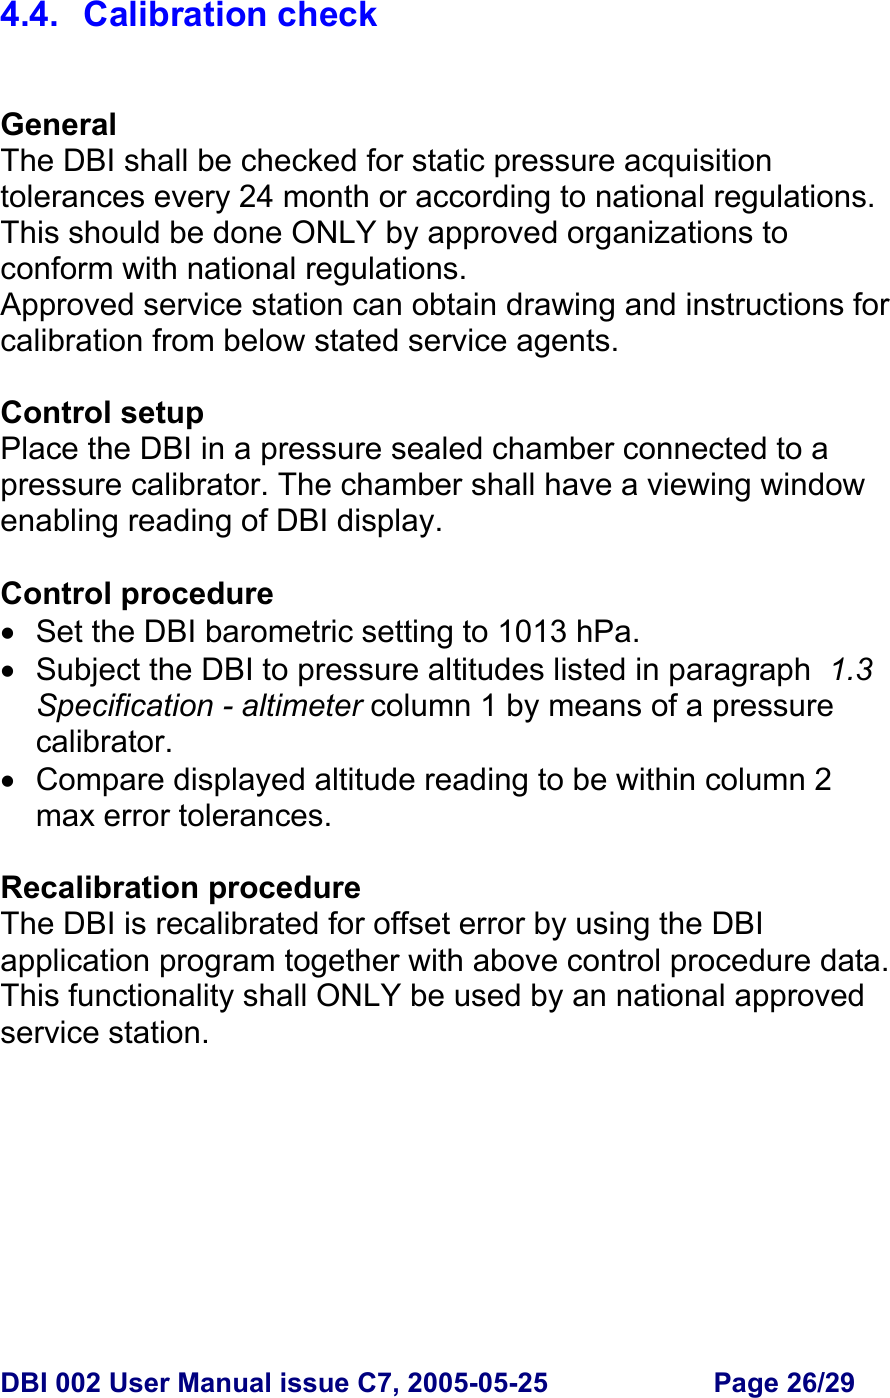  DBI 002 User Manual issue C7, 2005-05-25  Page 26/29  4.4. Calibration check   General The DBI shall be checked for static pressure acquisition tolerances every 24 month or according to national regulations. This should be done ONLY by approved organizations to conform with national regulations. Approved service station can obtain drawing and instructions for calibration from below stated service agents.  Control setup Place the DBI in a pressure sealed chamber connected to a pressure calibrator. The chamber shall have a viewing window enabling reading of DBI display.  Control procedure •  Set the DBI barometric setting to 1013 hPa. •  Subject the DBI to pressure altitudes listed in paragraph  1.3 Specification - altimeter column 1 by means of a pressure calibrator. • Compare displayed altitude reading to be within column 2 max error tolerances.  Recalibration procedure The DBI is recalibrated for offset error by using the DBI application program together with above control procedure data. This functionality shall ONLY be used by an national approved service station.   